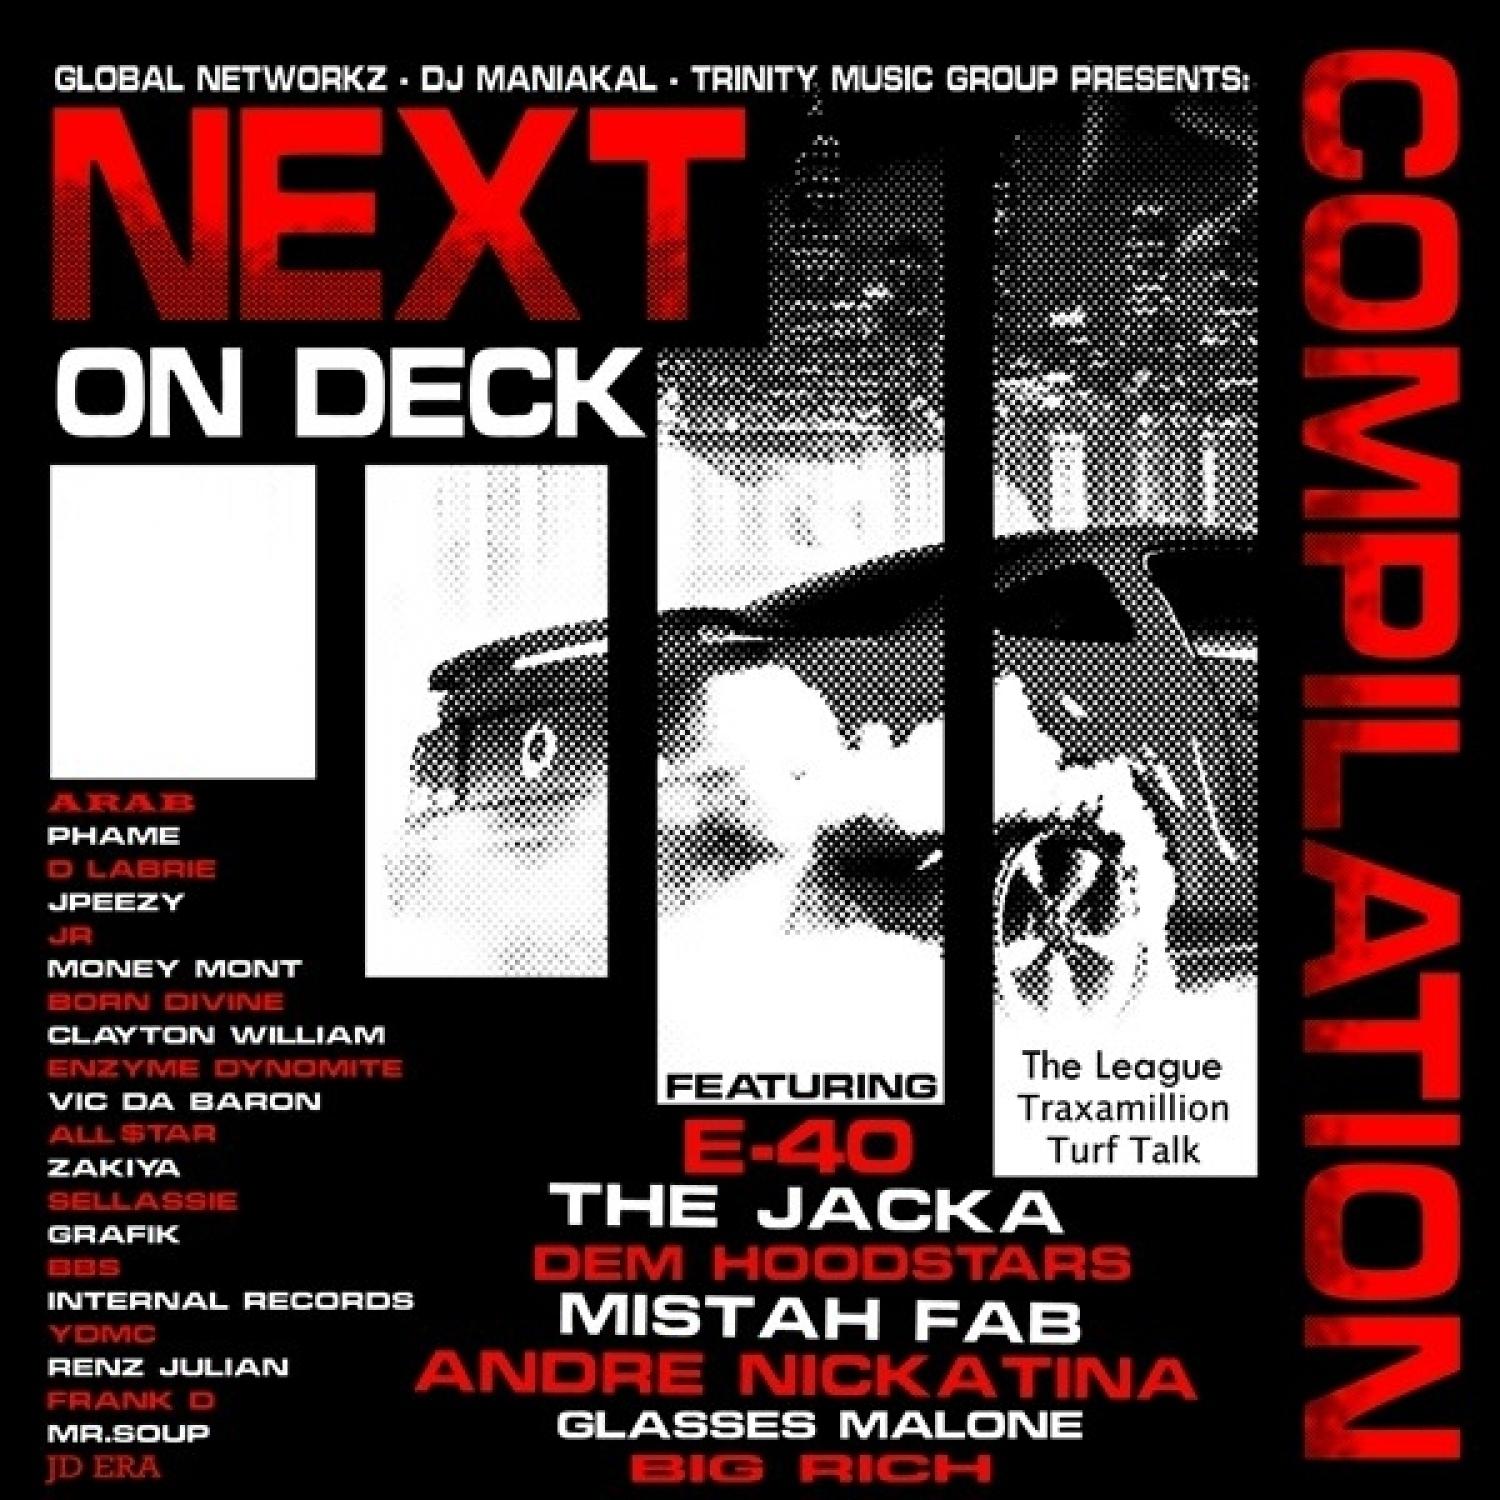 Next on Deck The Compilation vol. 1